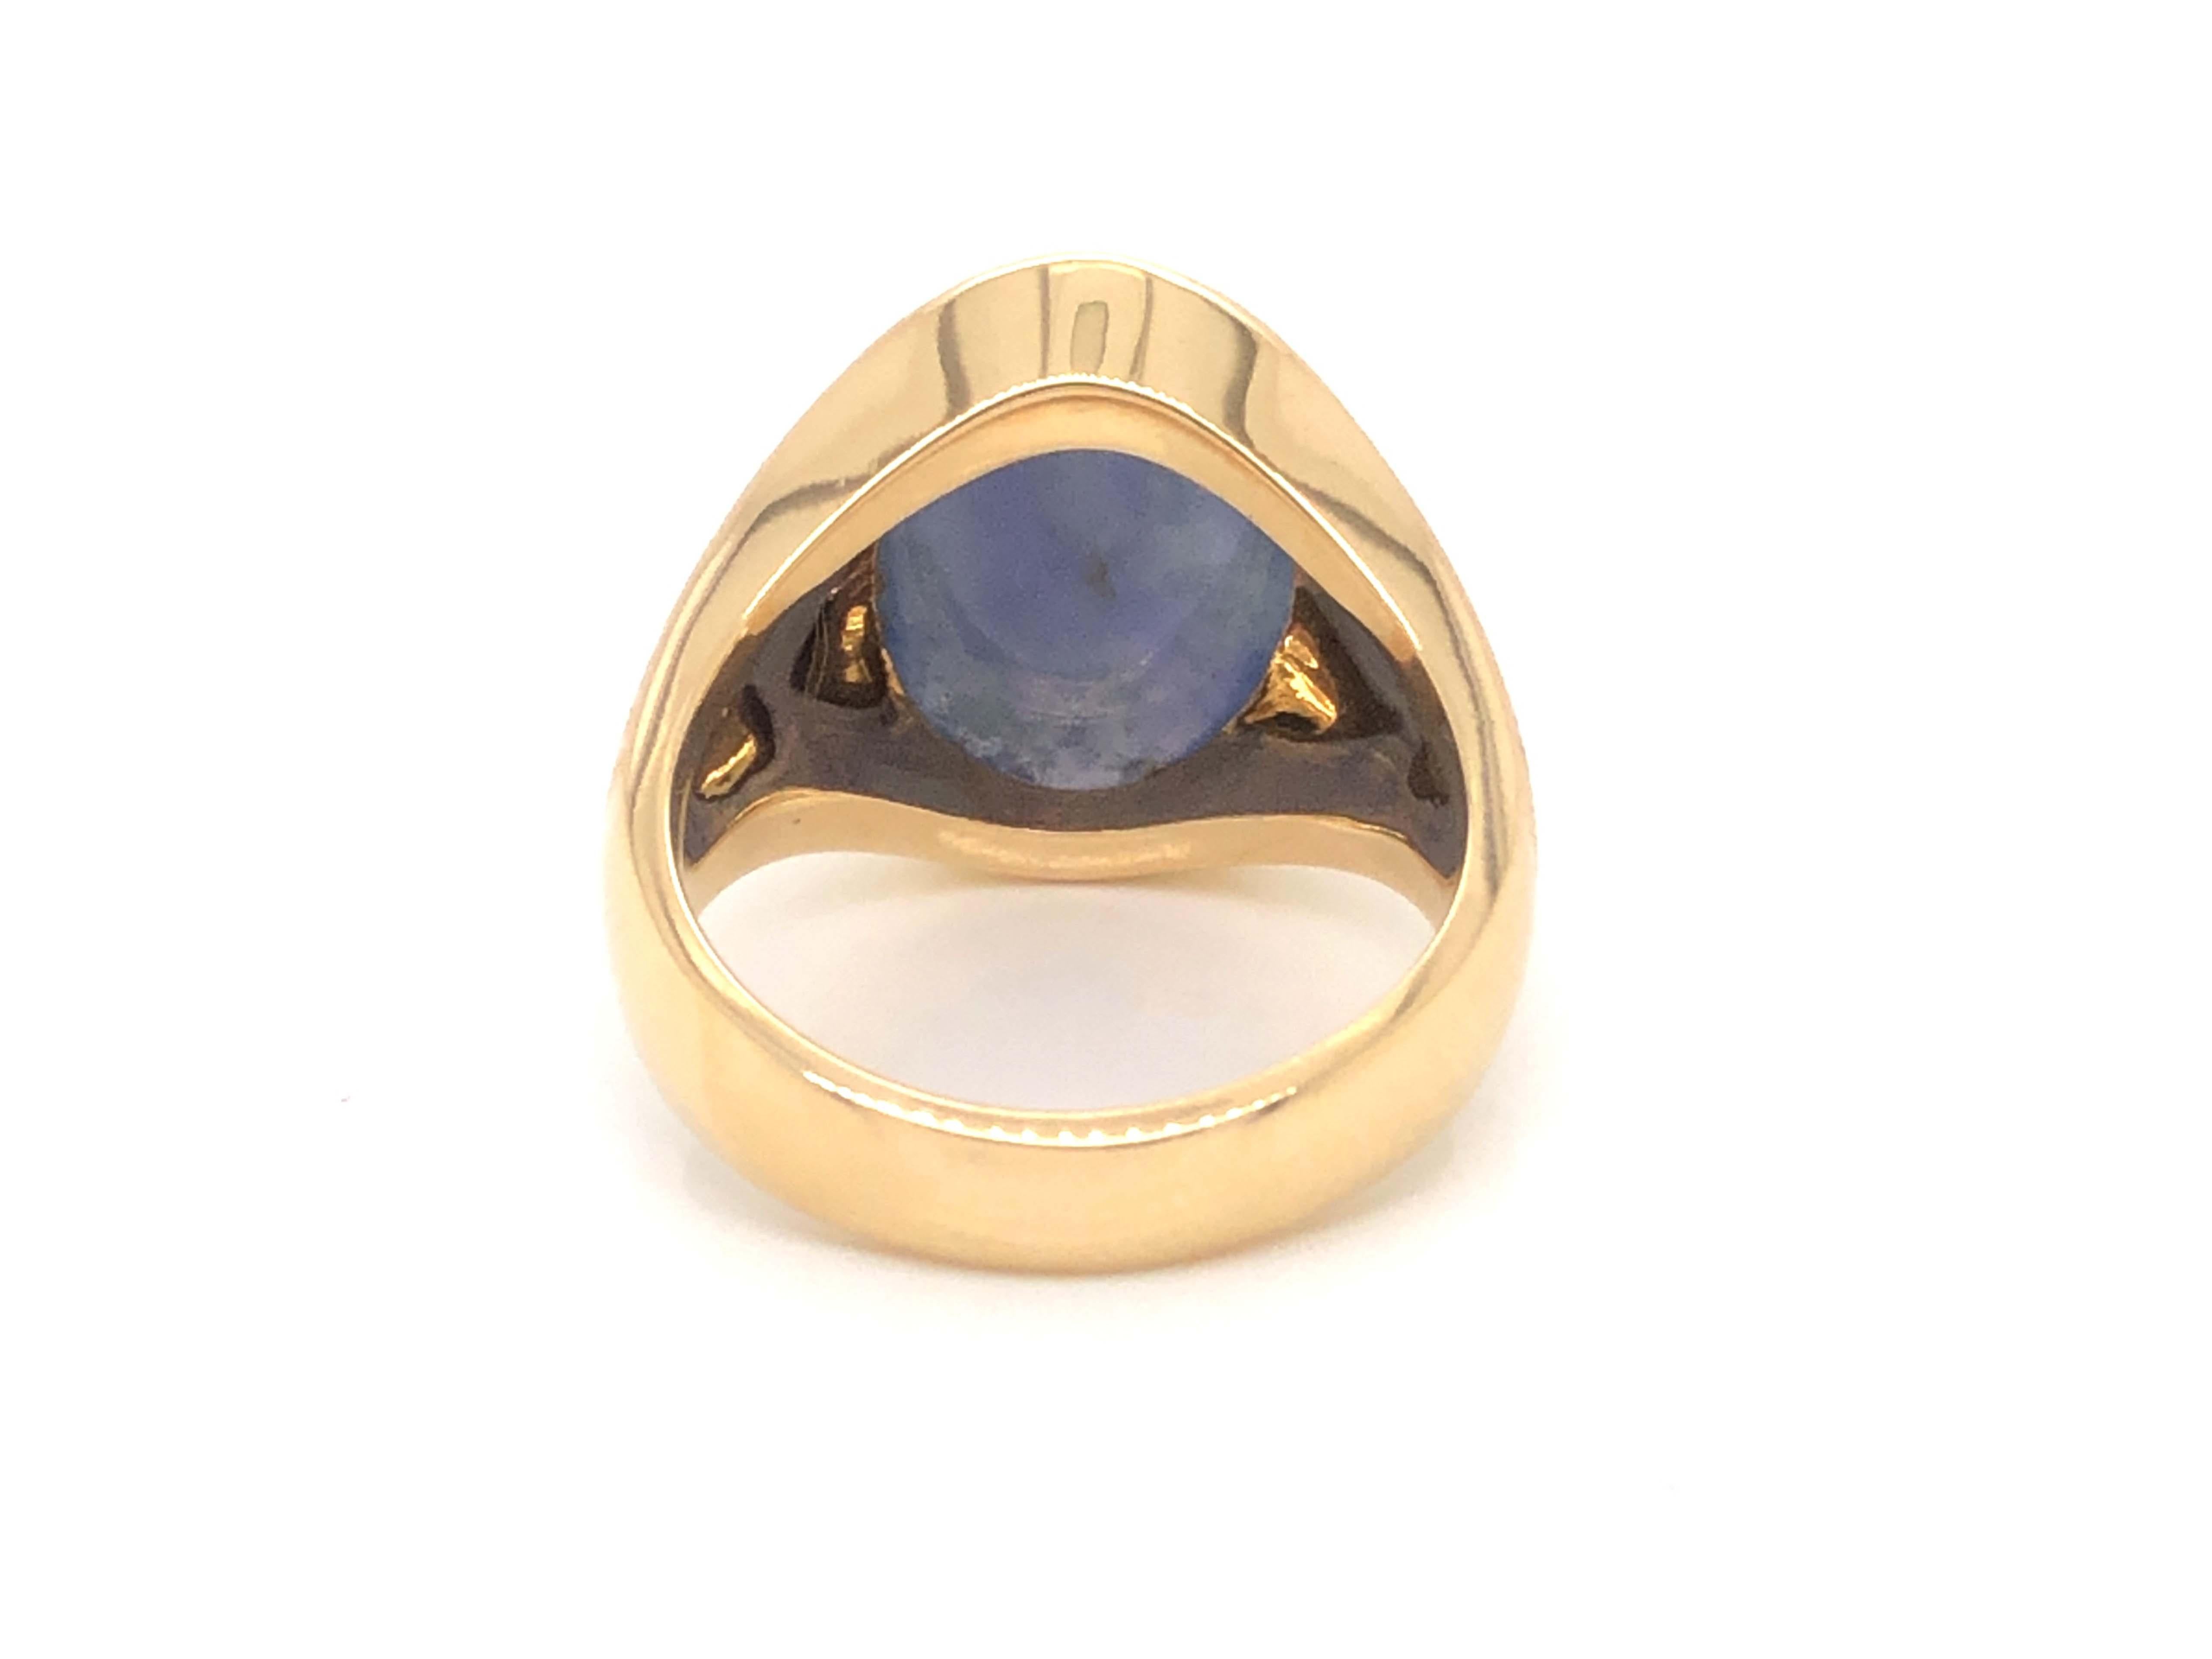 Vintage Rare Oval Cabochon Purple Blue Jade Ring - 14k Yellow Gold 1